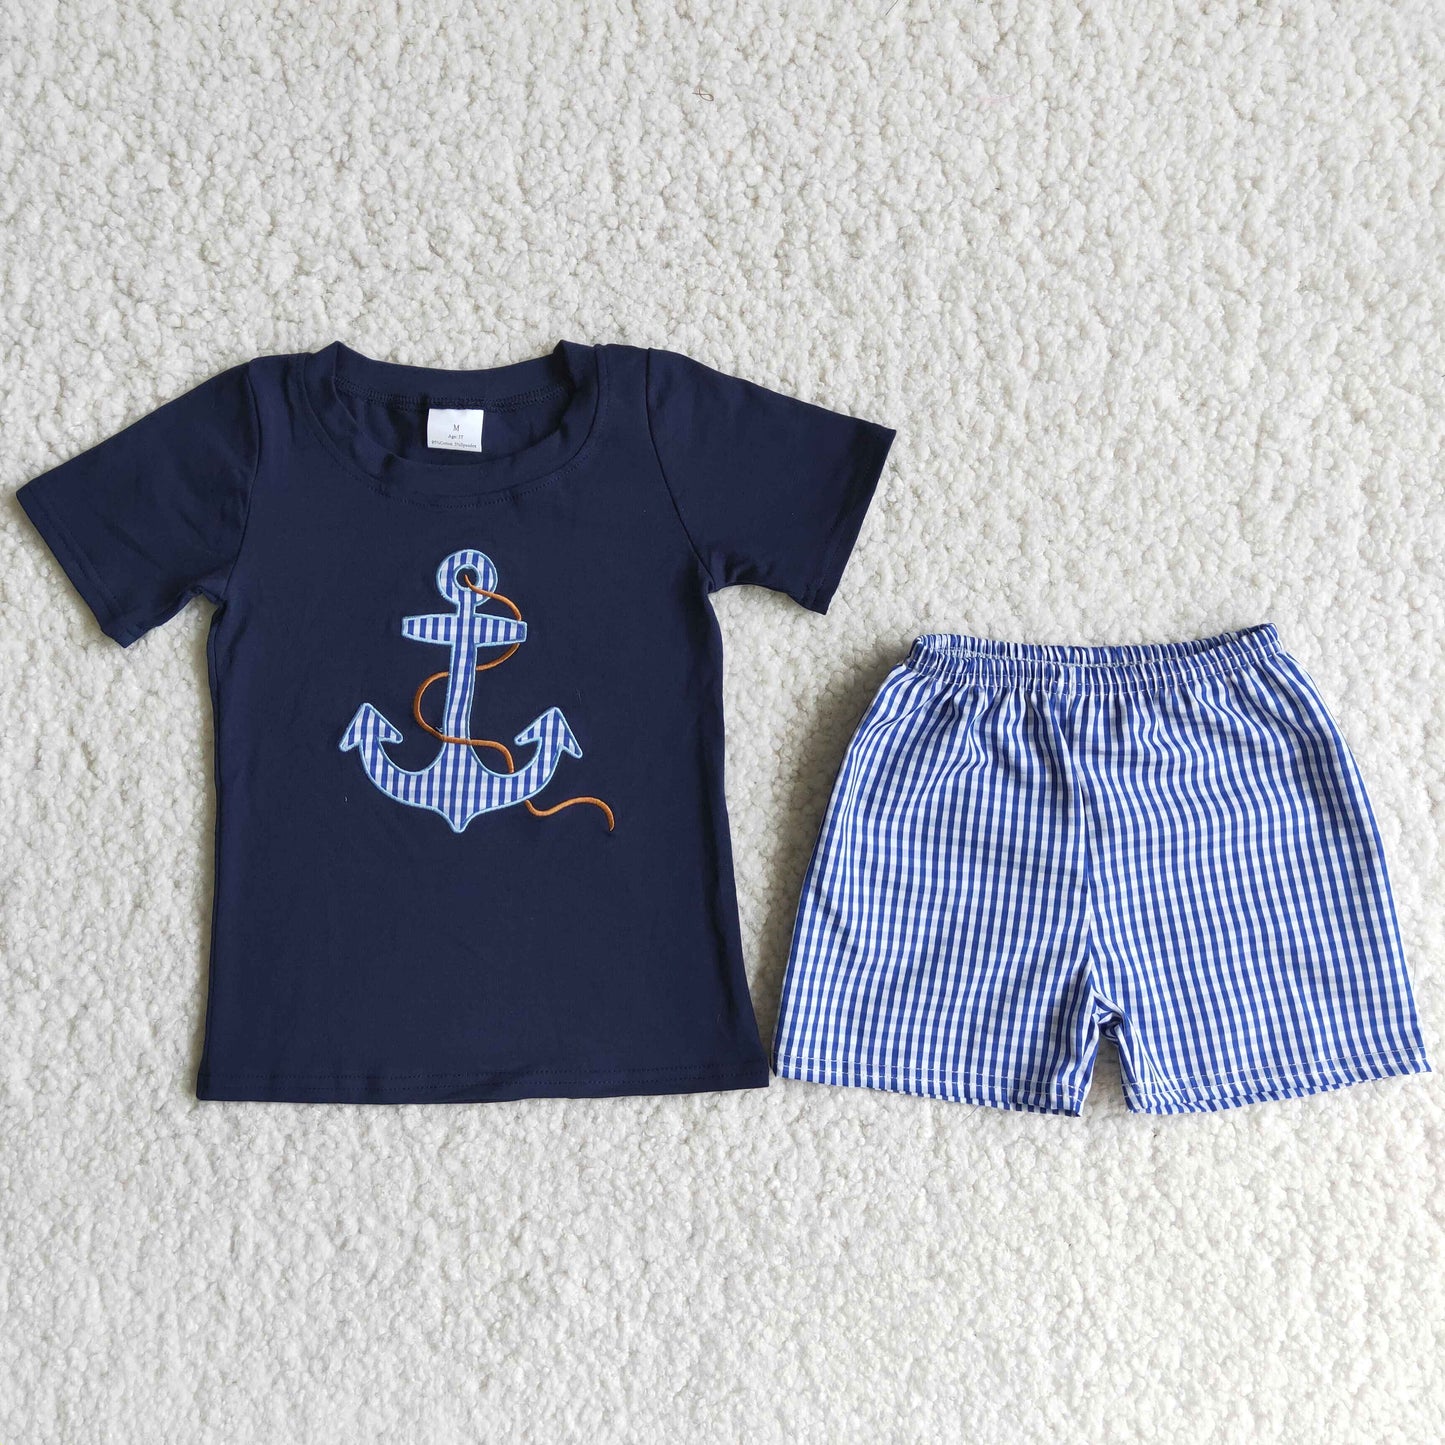 rts no moq D12-17 Spear embroidery blue checkered seersucker shorts